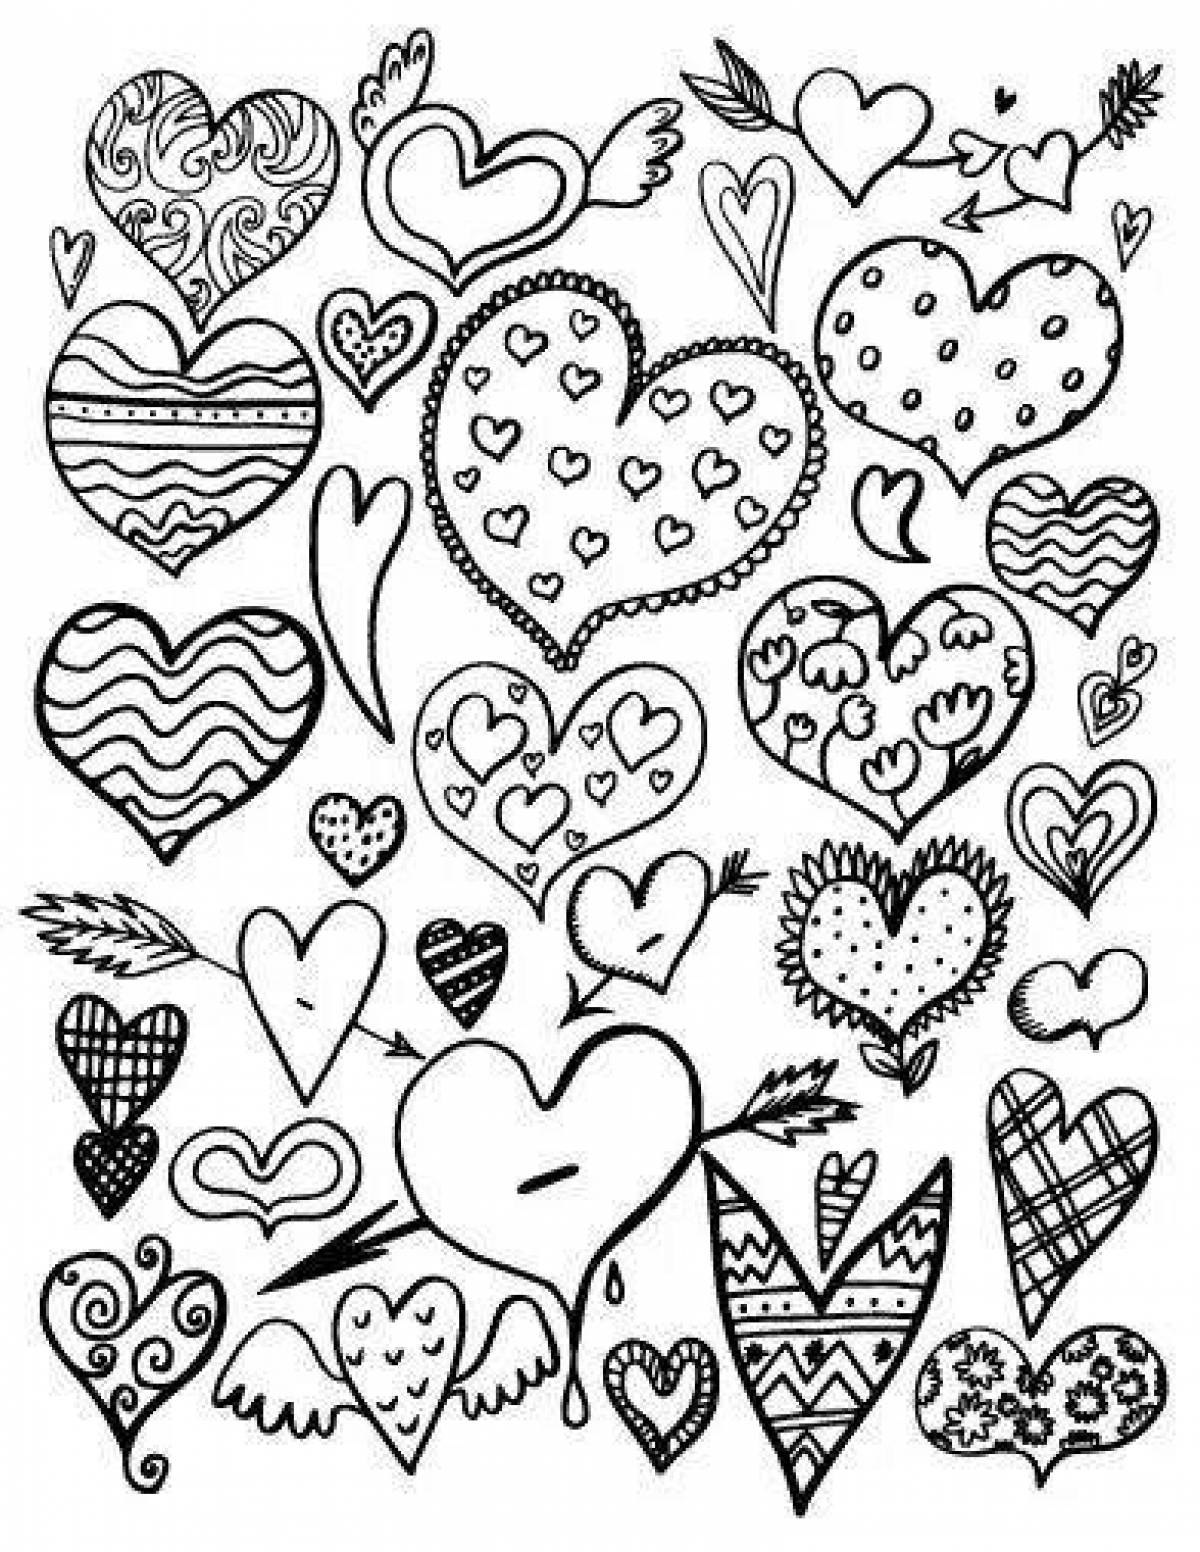 Dazzling many hearts coloring page